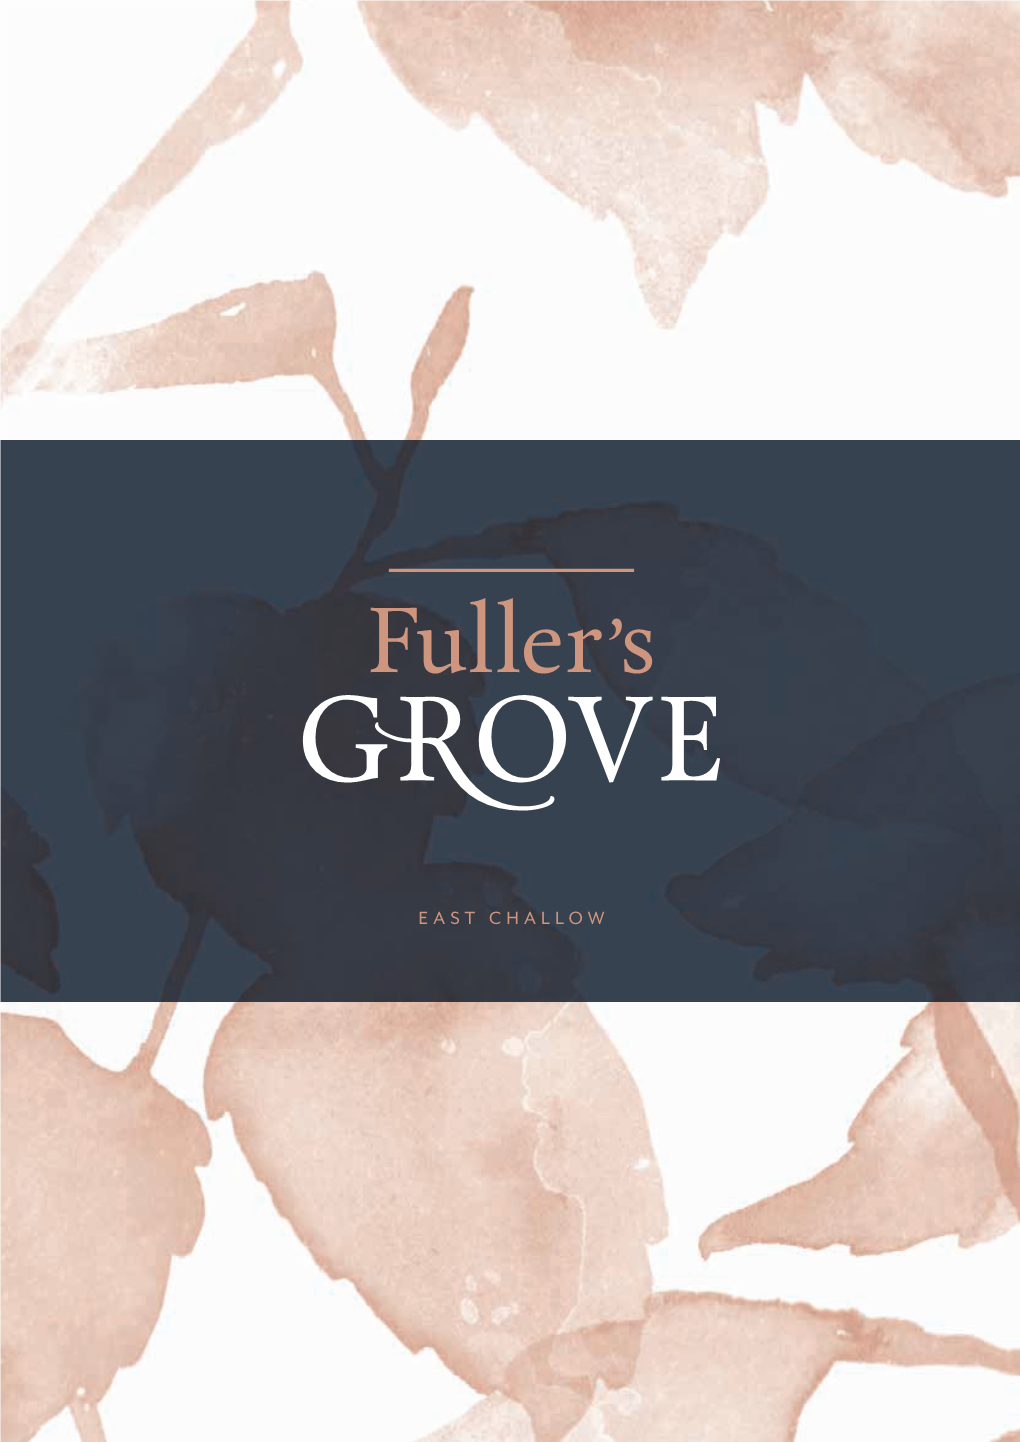 EAST CHALLOW Nestled Within the Idyllic Village of East Challow and Surrounded by Countryside, Fuller’S Grove Is a Wonderful Place to Call Home